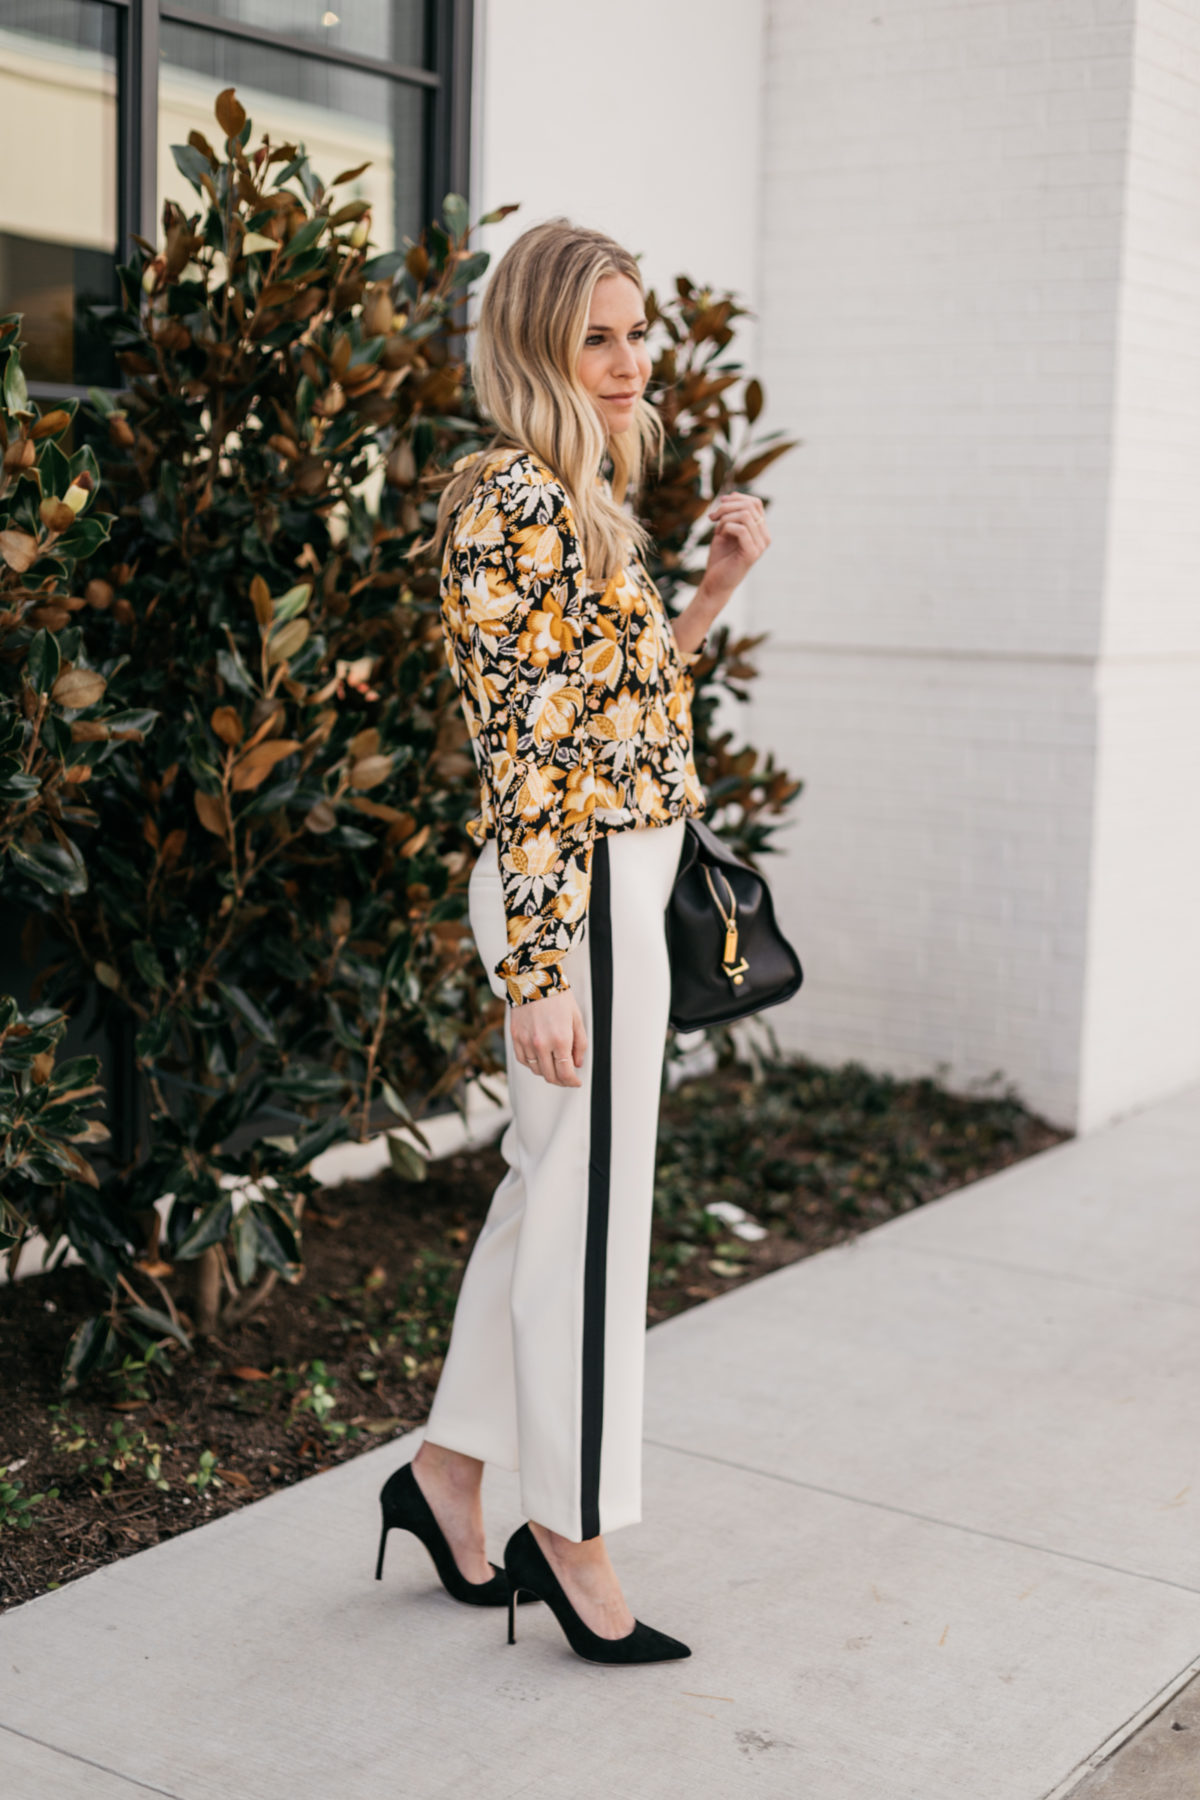 OUTFIT 2  White with Black Stripe Pants // Yellow and Black Floral Long Sleeve Blouse // Black Suede Heels // Black Work Bag